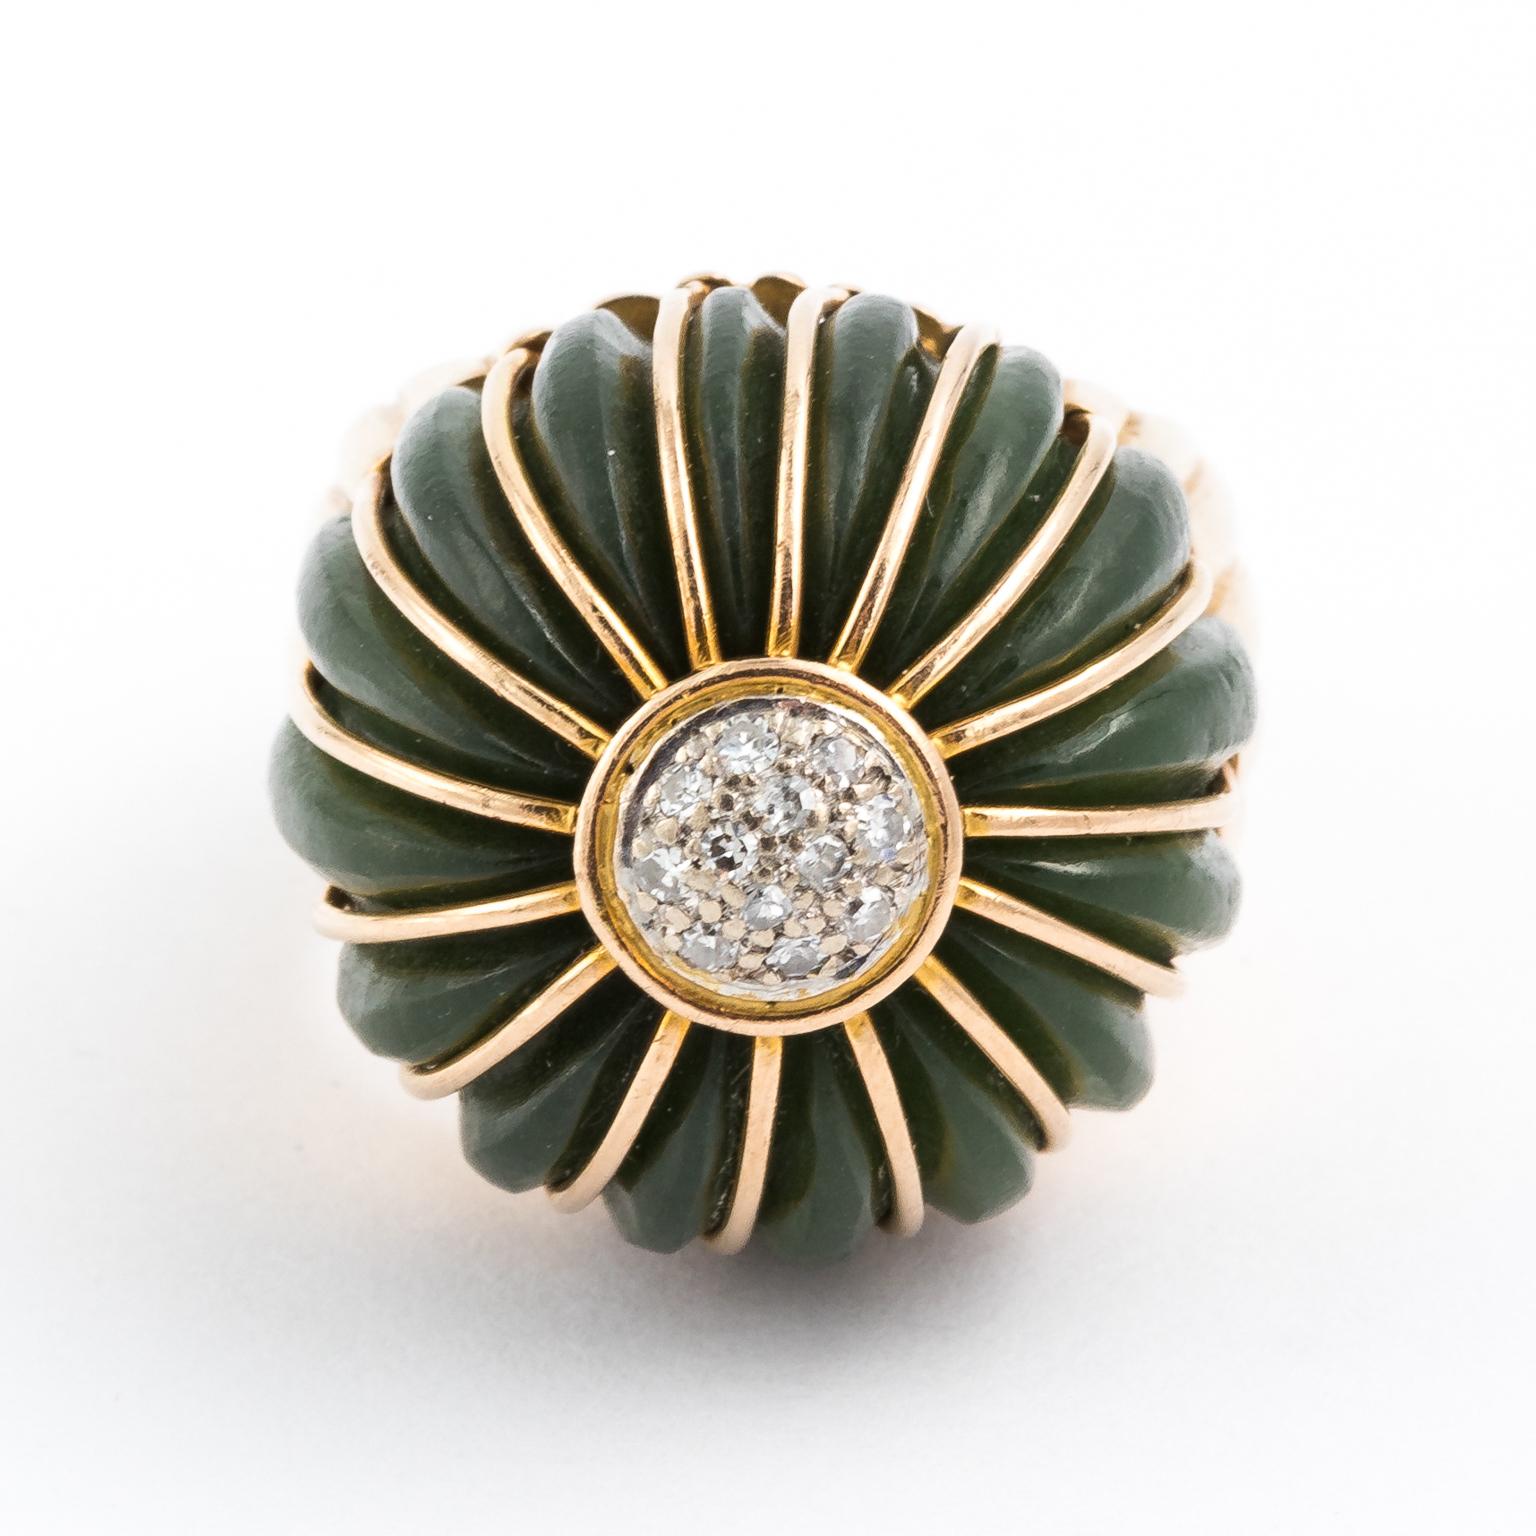 Circa 1960s Jade cocktail ring set in 14 karat gold with visually designed lineal strips of gold going down the large 0.50 centimeter jade dome.
